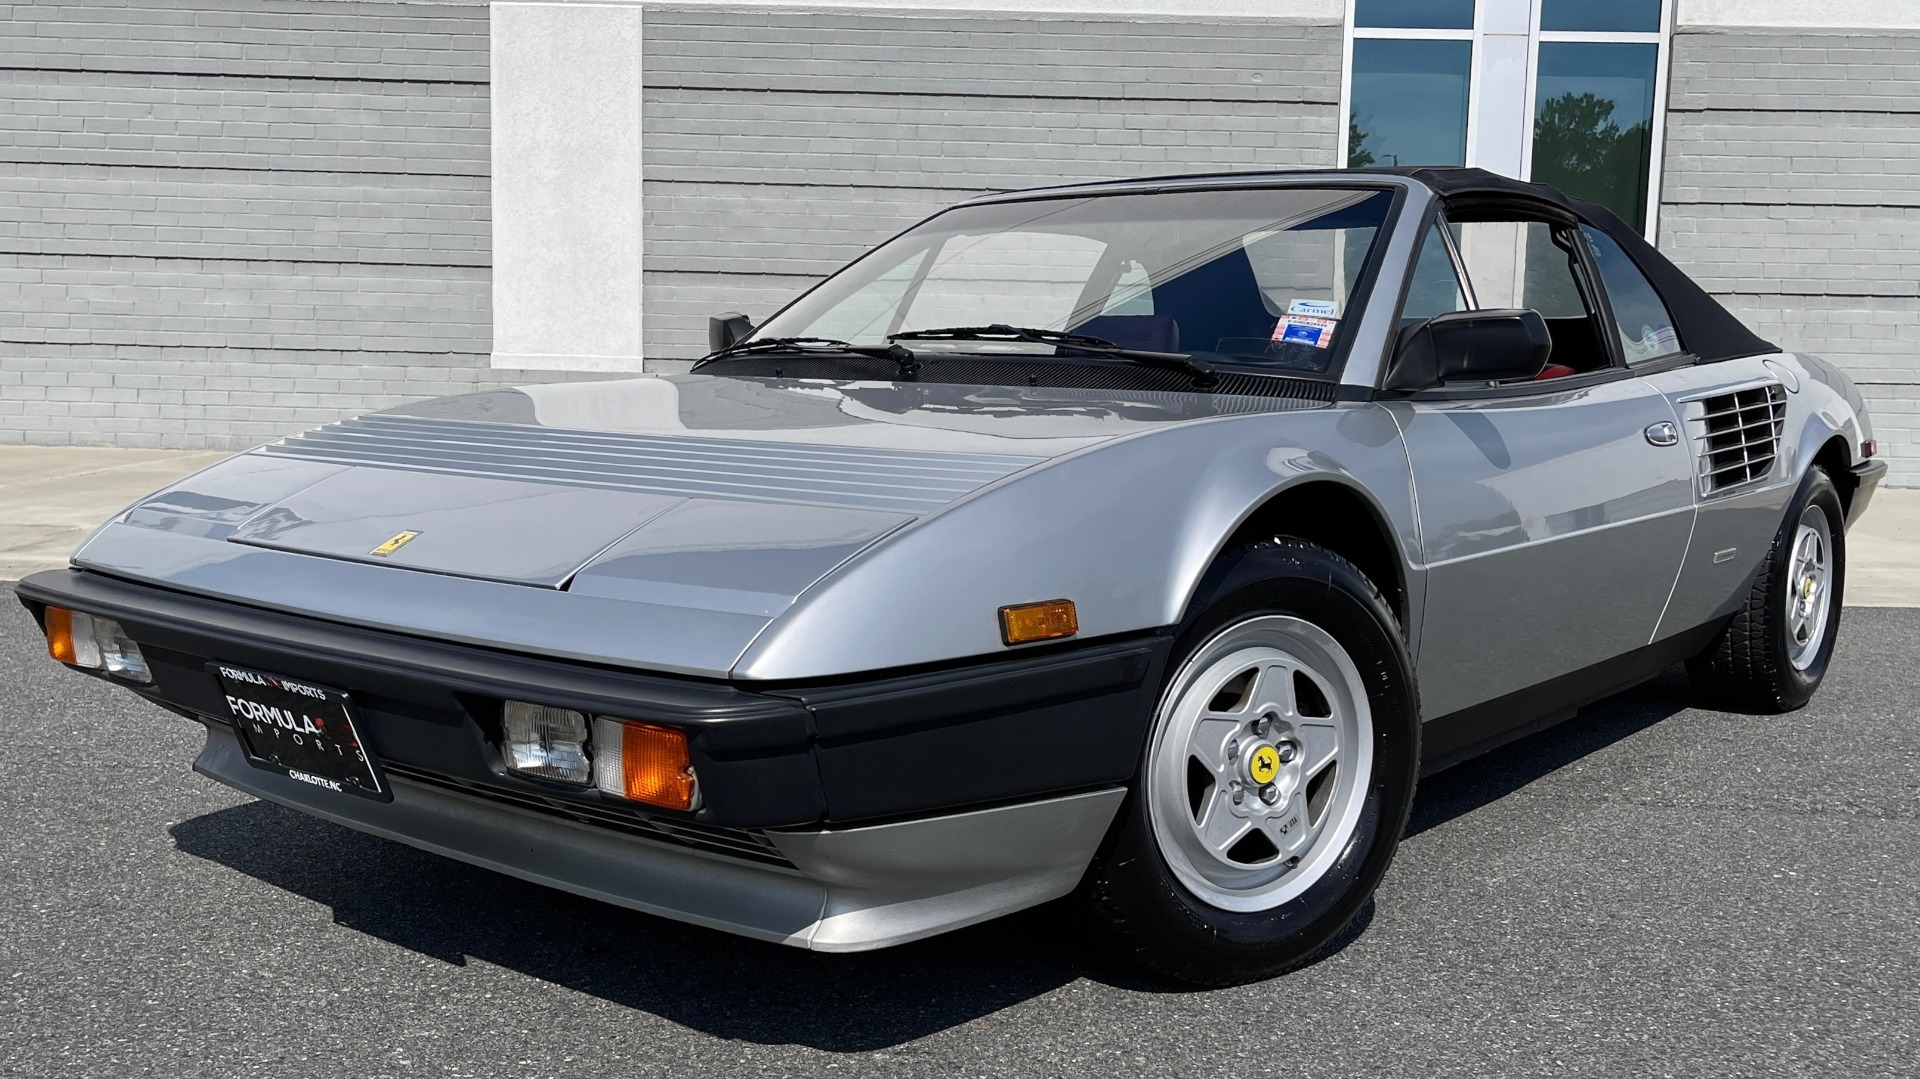 Used 1984 Ferrari MONDIAL 2+2 CABRIOLET / MID-ENGINE 3.0L V8 240HP / 5-SPEED MANUAL / LOW MILES for sale $57,999 at Formula Imports in Charlotte NC 28227 1